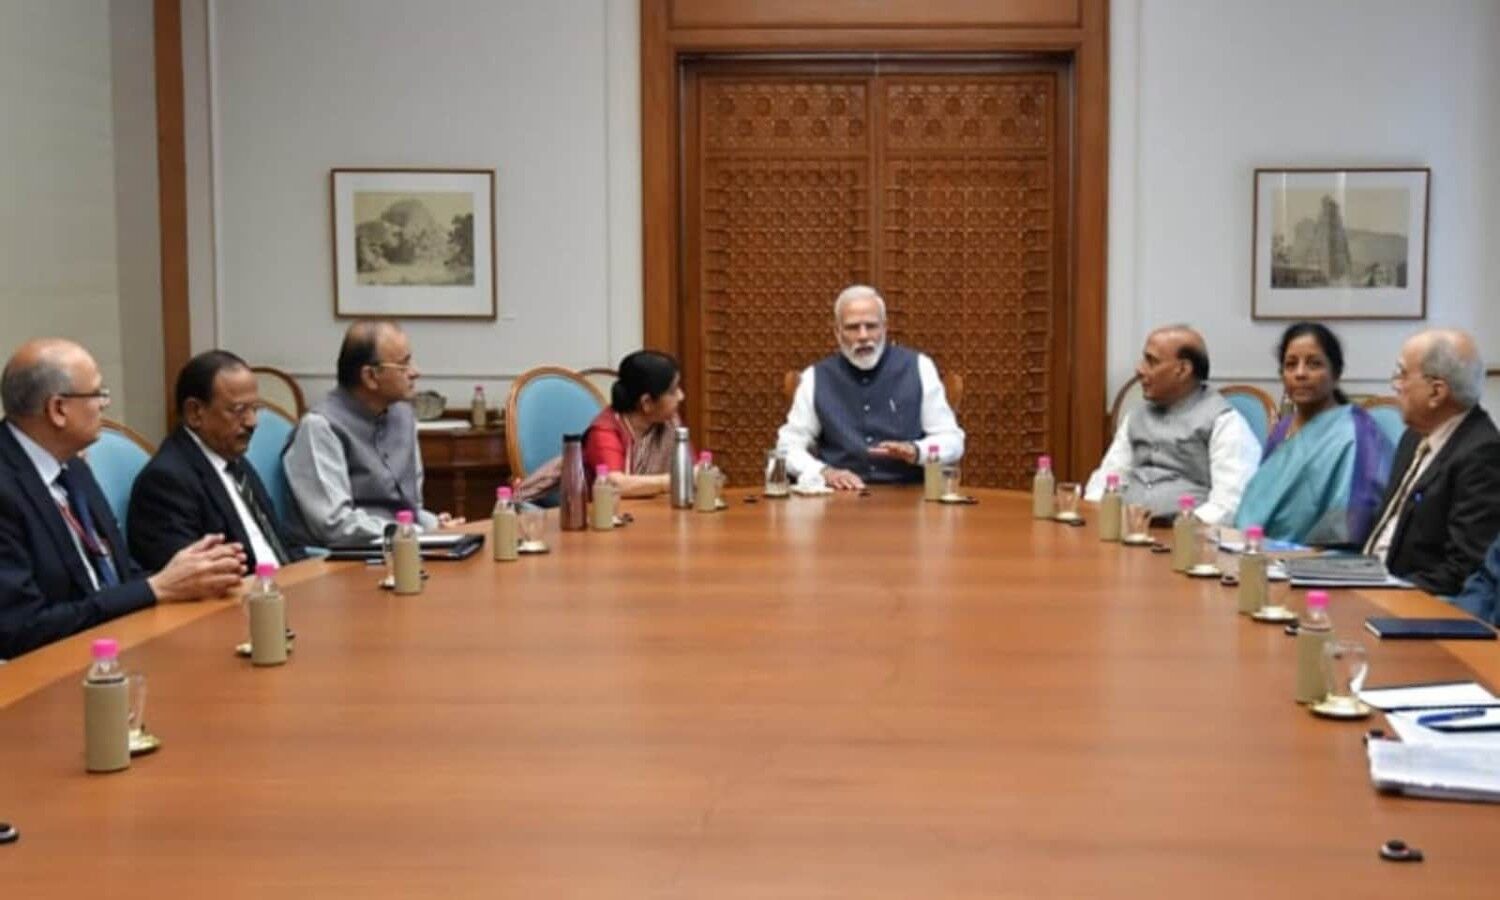 Climate Change: Cabinet approves country’s NDC, converts PM Modi’s ‘Panchamrit’ into climate goals